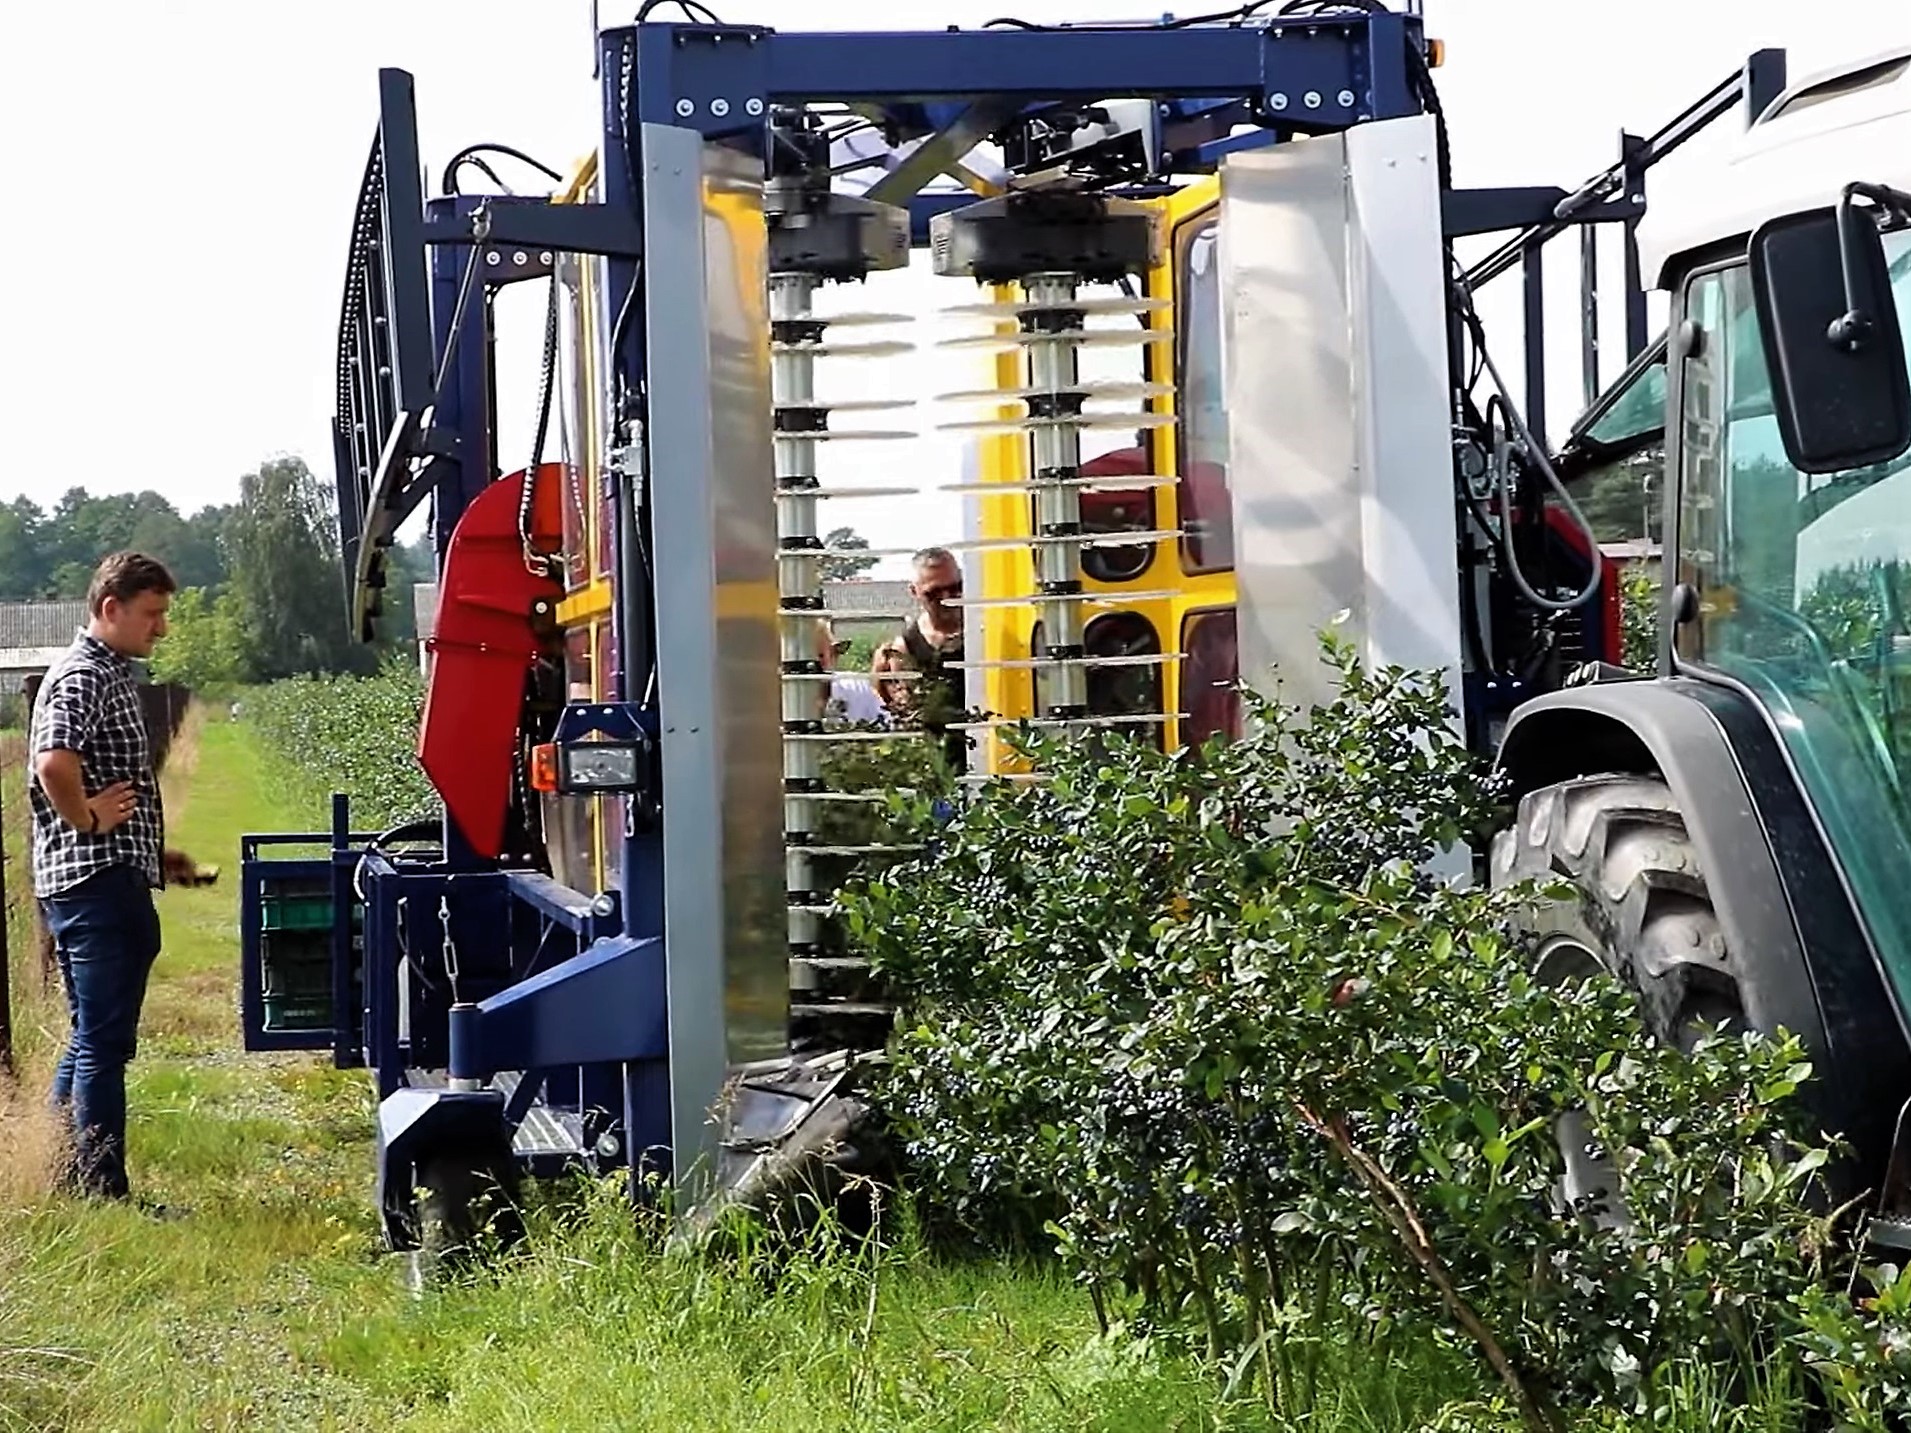 JAGODA 300 is the latest solution of raspberry and blueberry harvester.